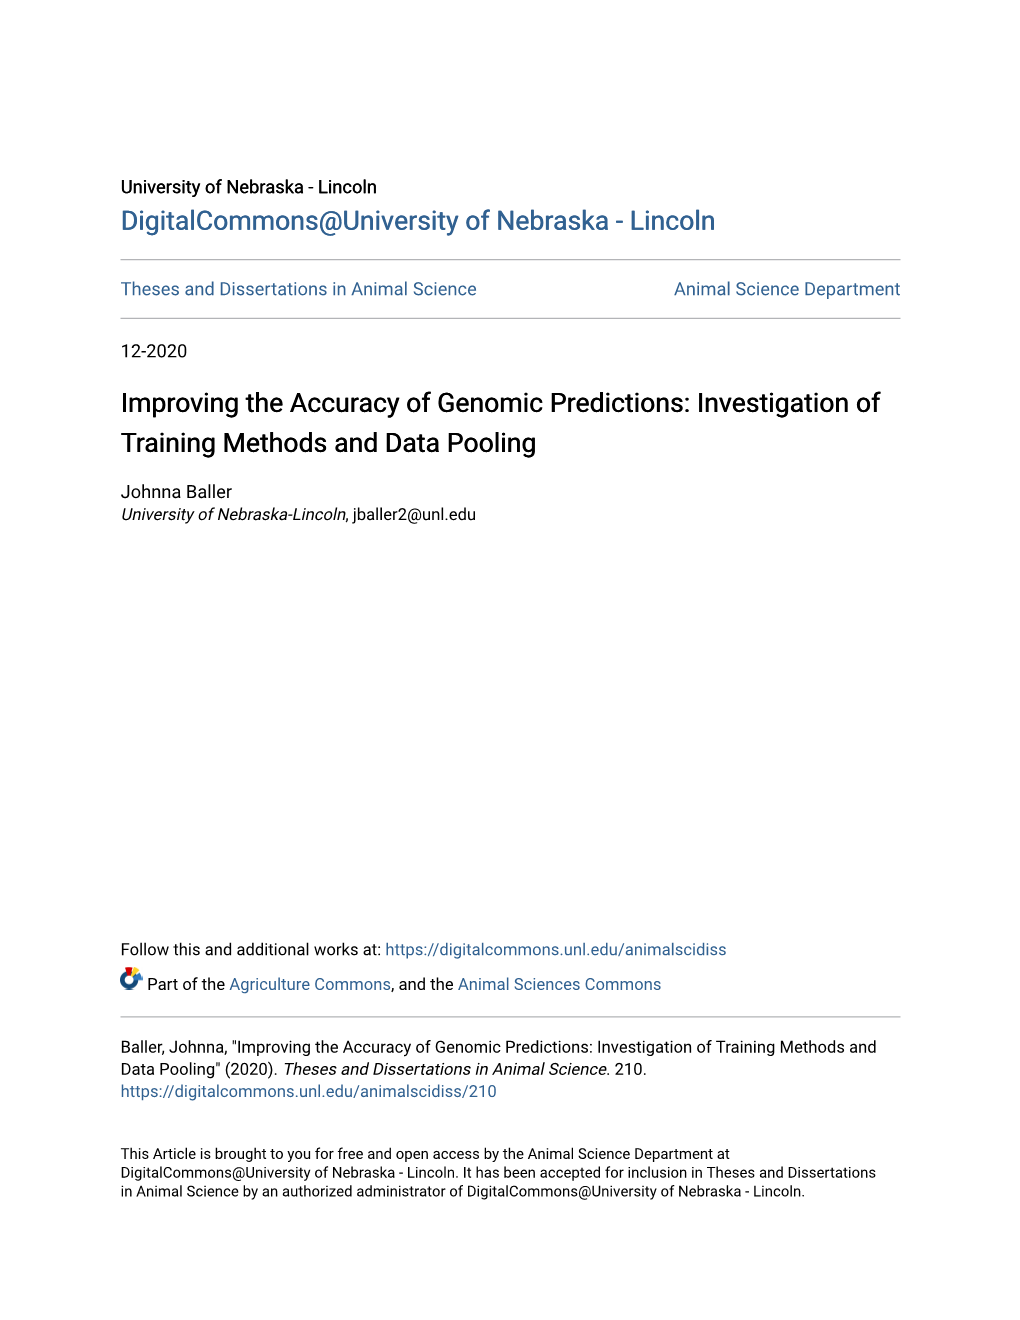 Improving the Accuracy of Genomic Predictions: Investigation of Training Methods and Data Pooling